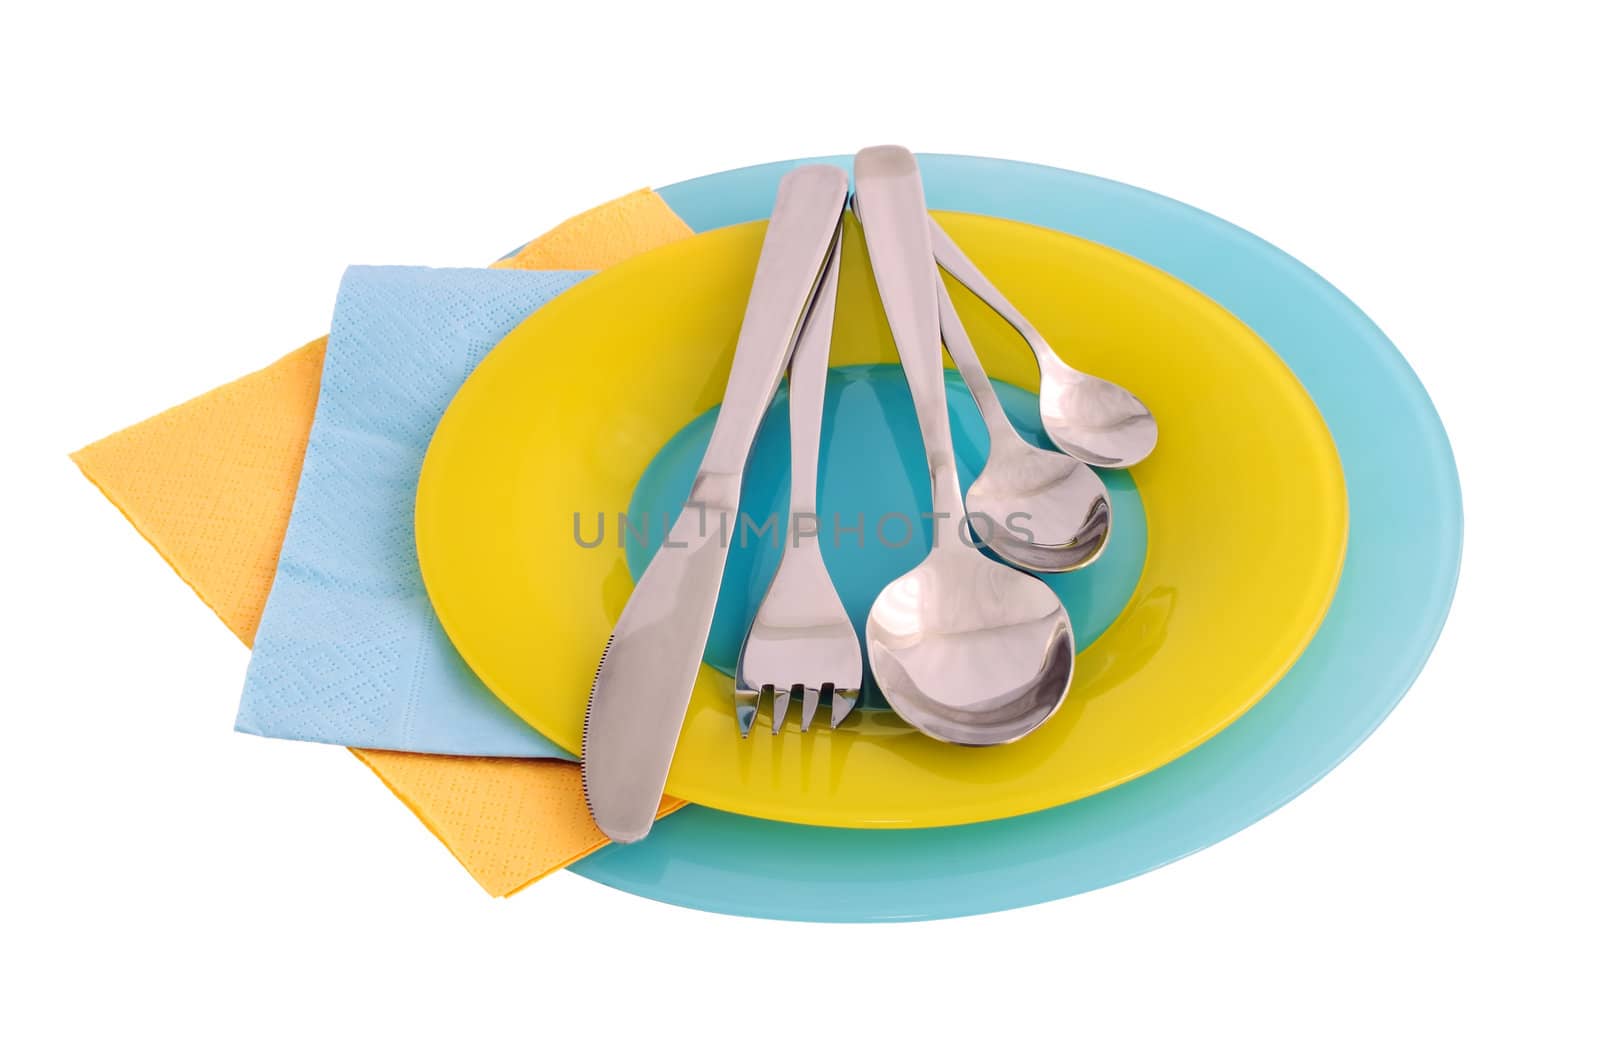 A set of cutlery on a plate with paper towels (isolated)